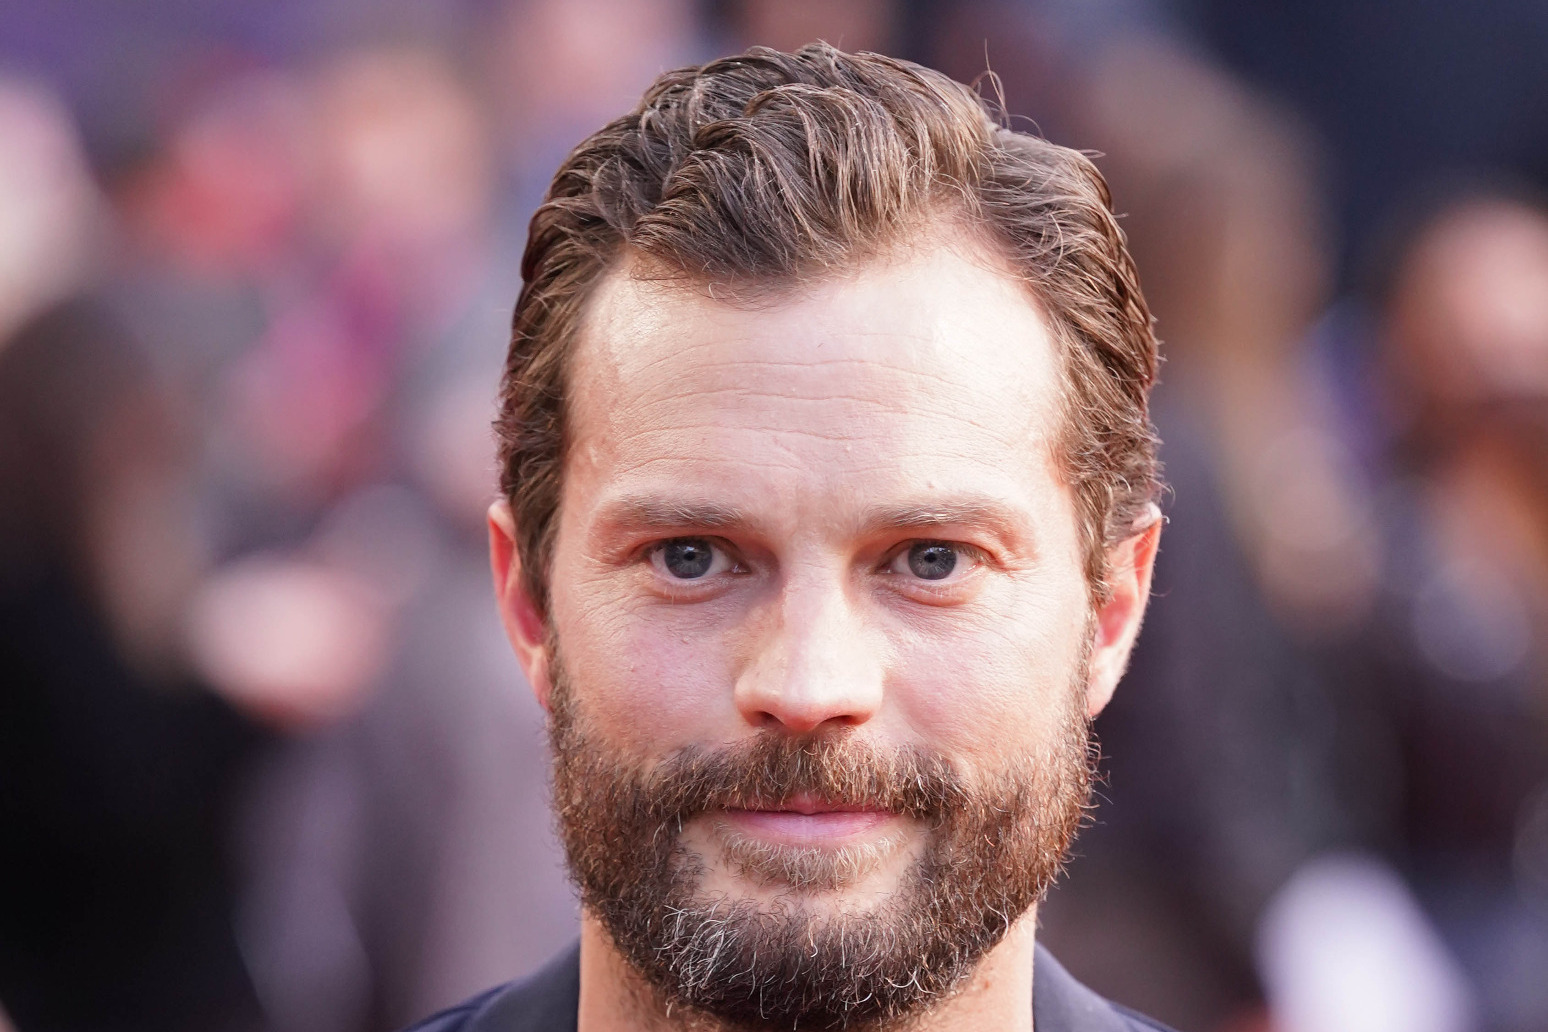 Jamie Dornan says he moved to Hollywood hoping to star in comedies 